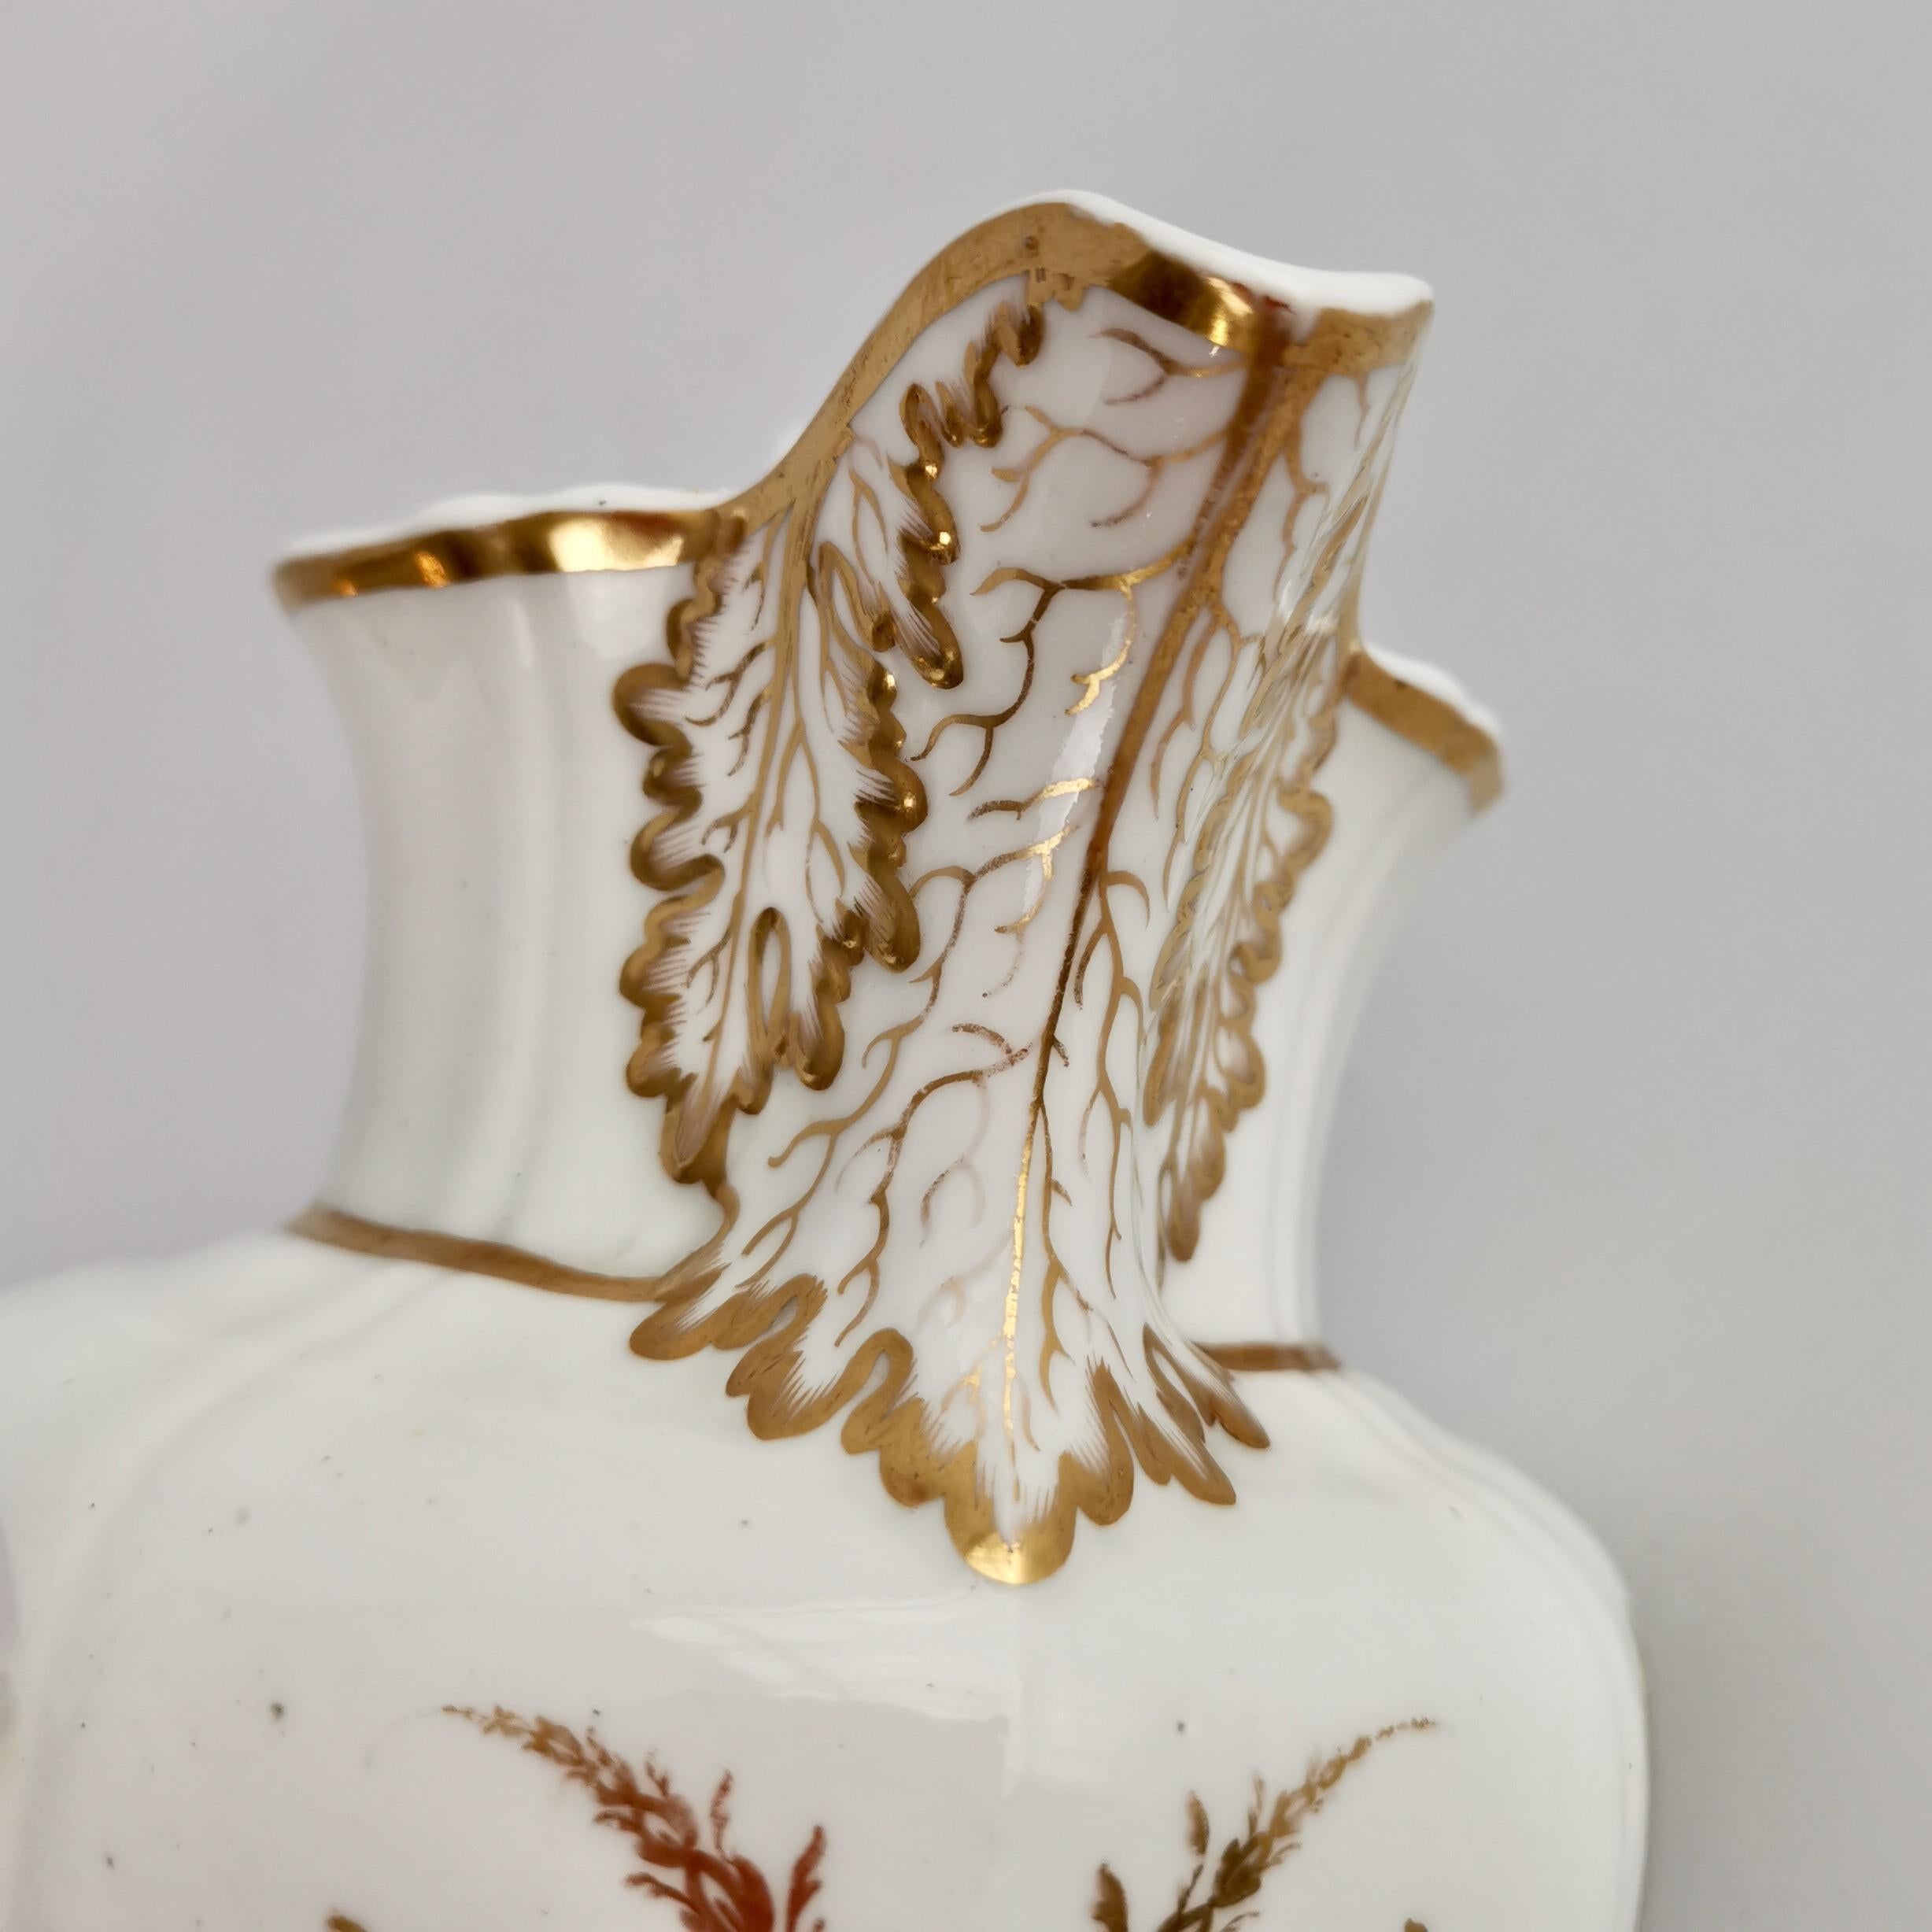 Early 19th Century Staffordshire Porcelain Jug, White with Landscapes, Regency ca 1820